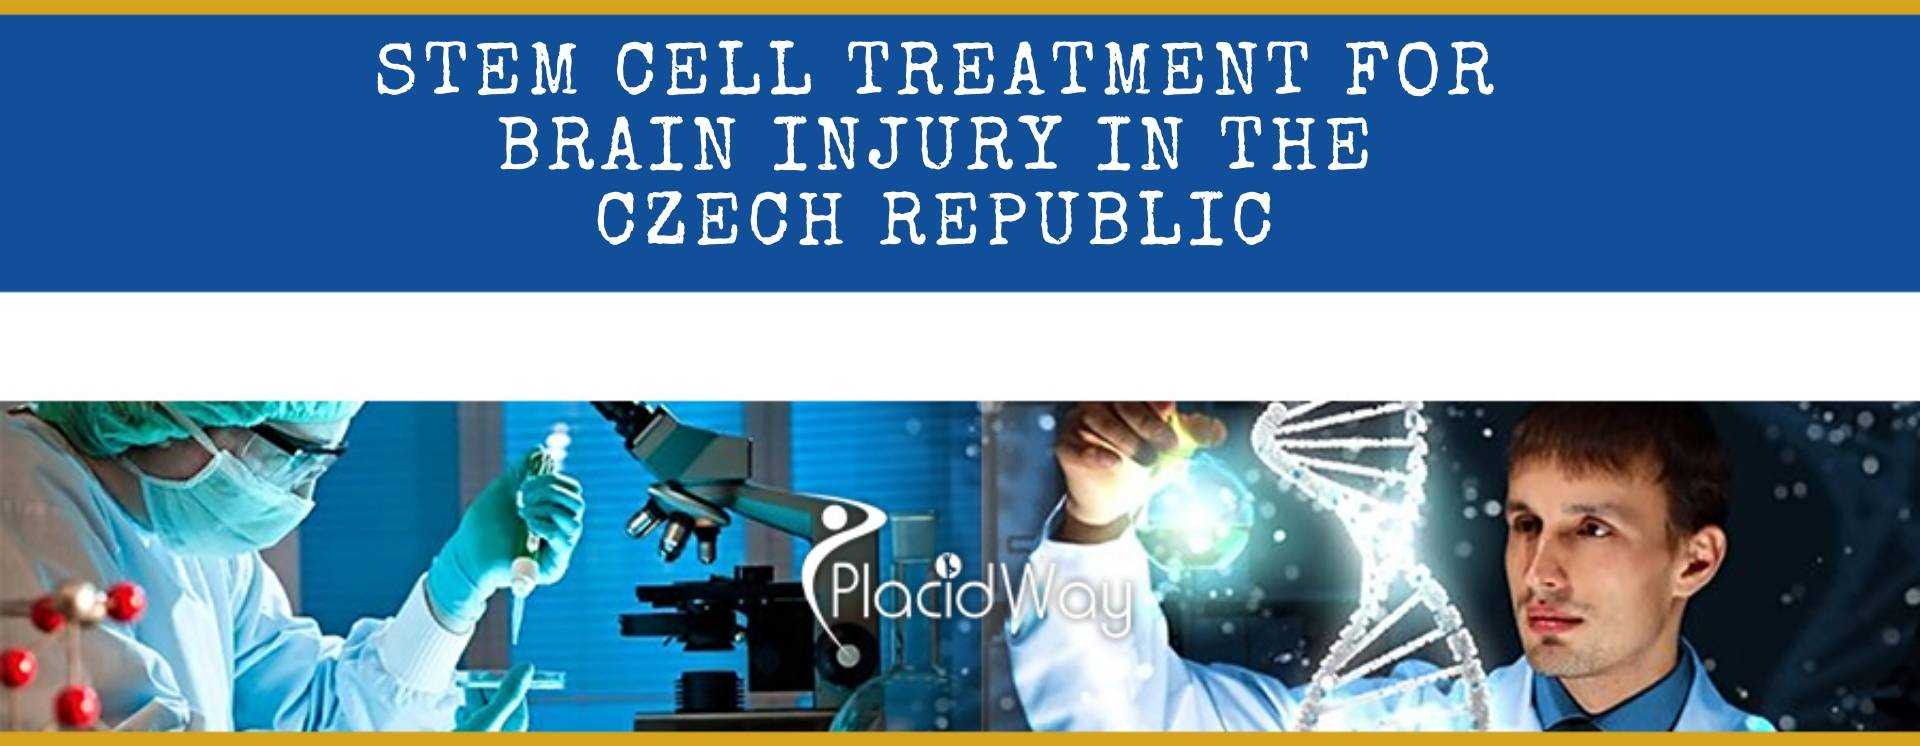 Stem Cell Treatment for Brain Injury in the Czech Republic